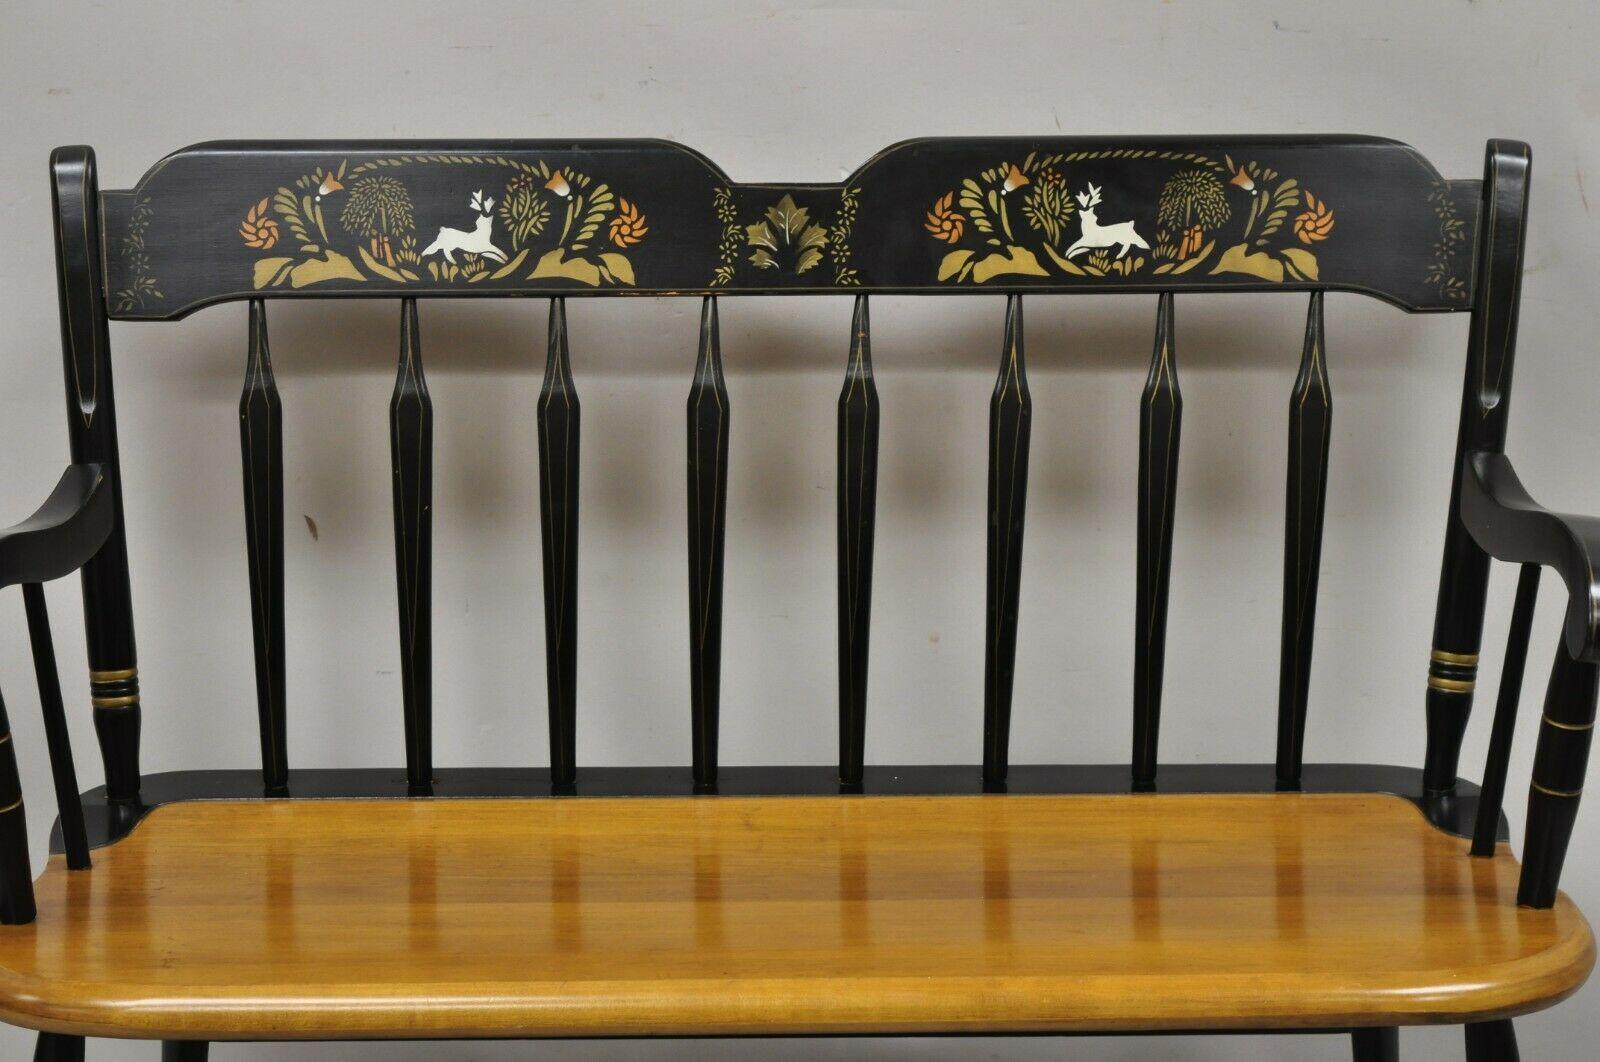 Vintage Hitchcock deacon arrow back bench black maple birch stencil paint. Item features stencil painted back rail, solid wood construction, beautiful wood grain, quality American craftsmanship, great style and form. Possibly by Ethan Allen. Circa